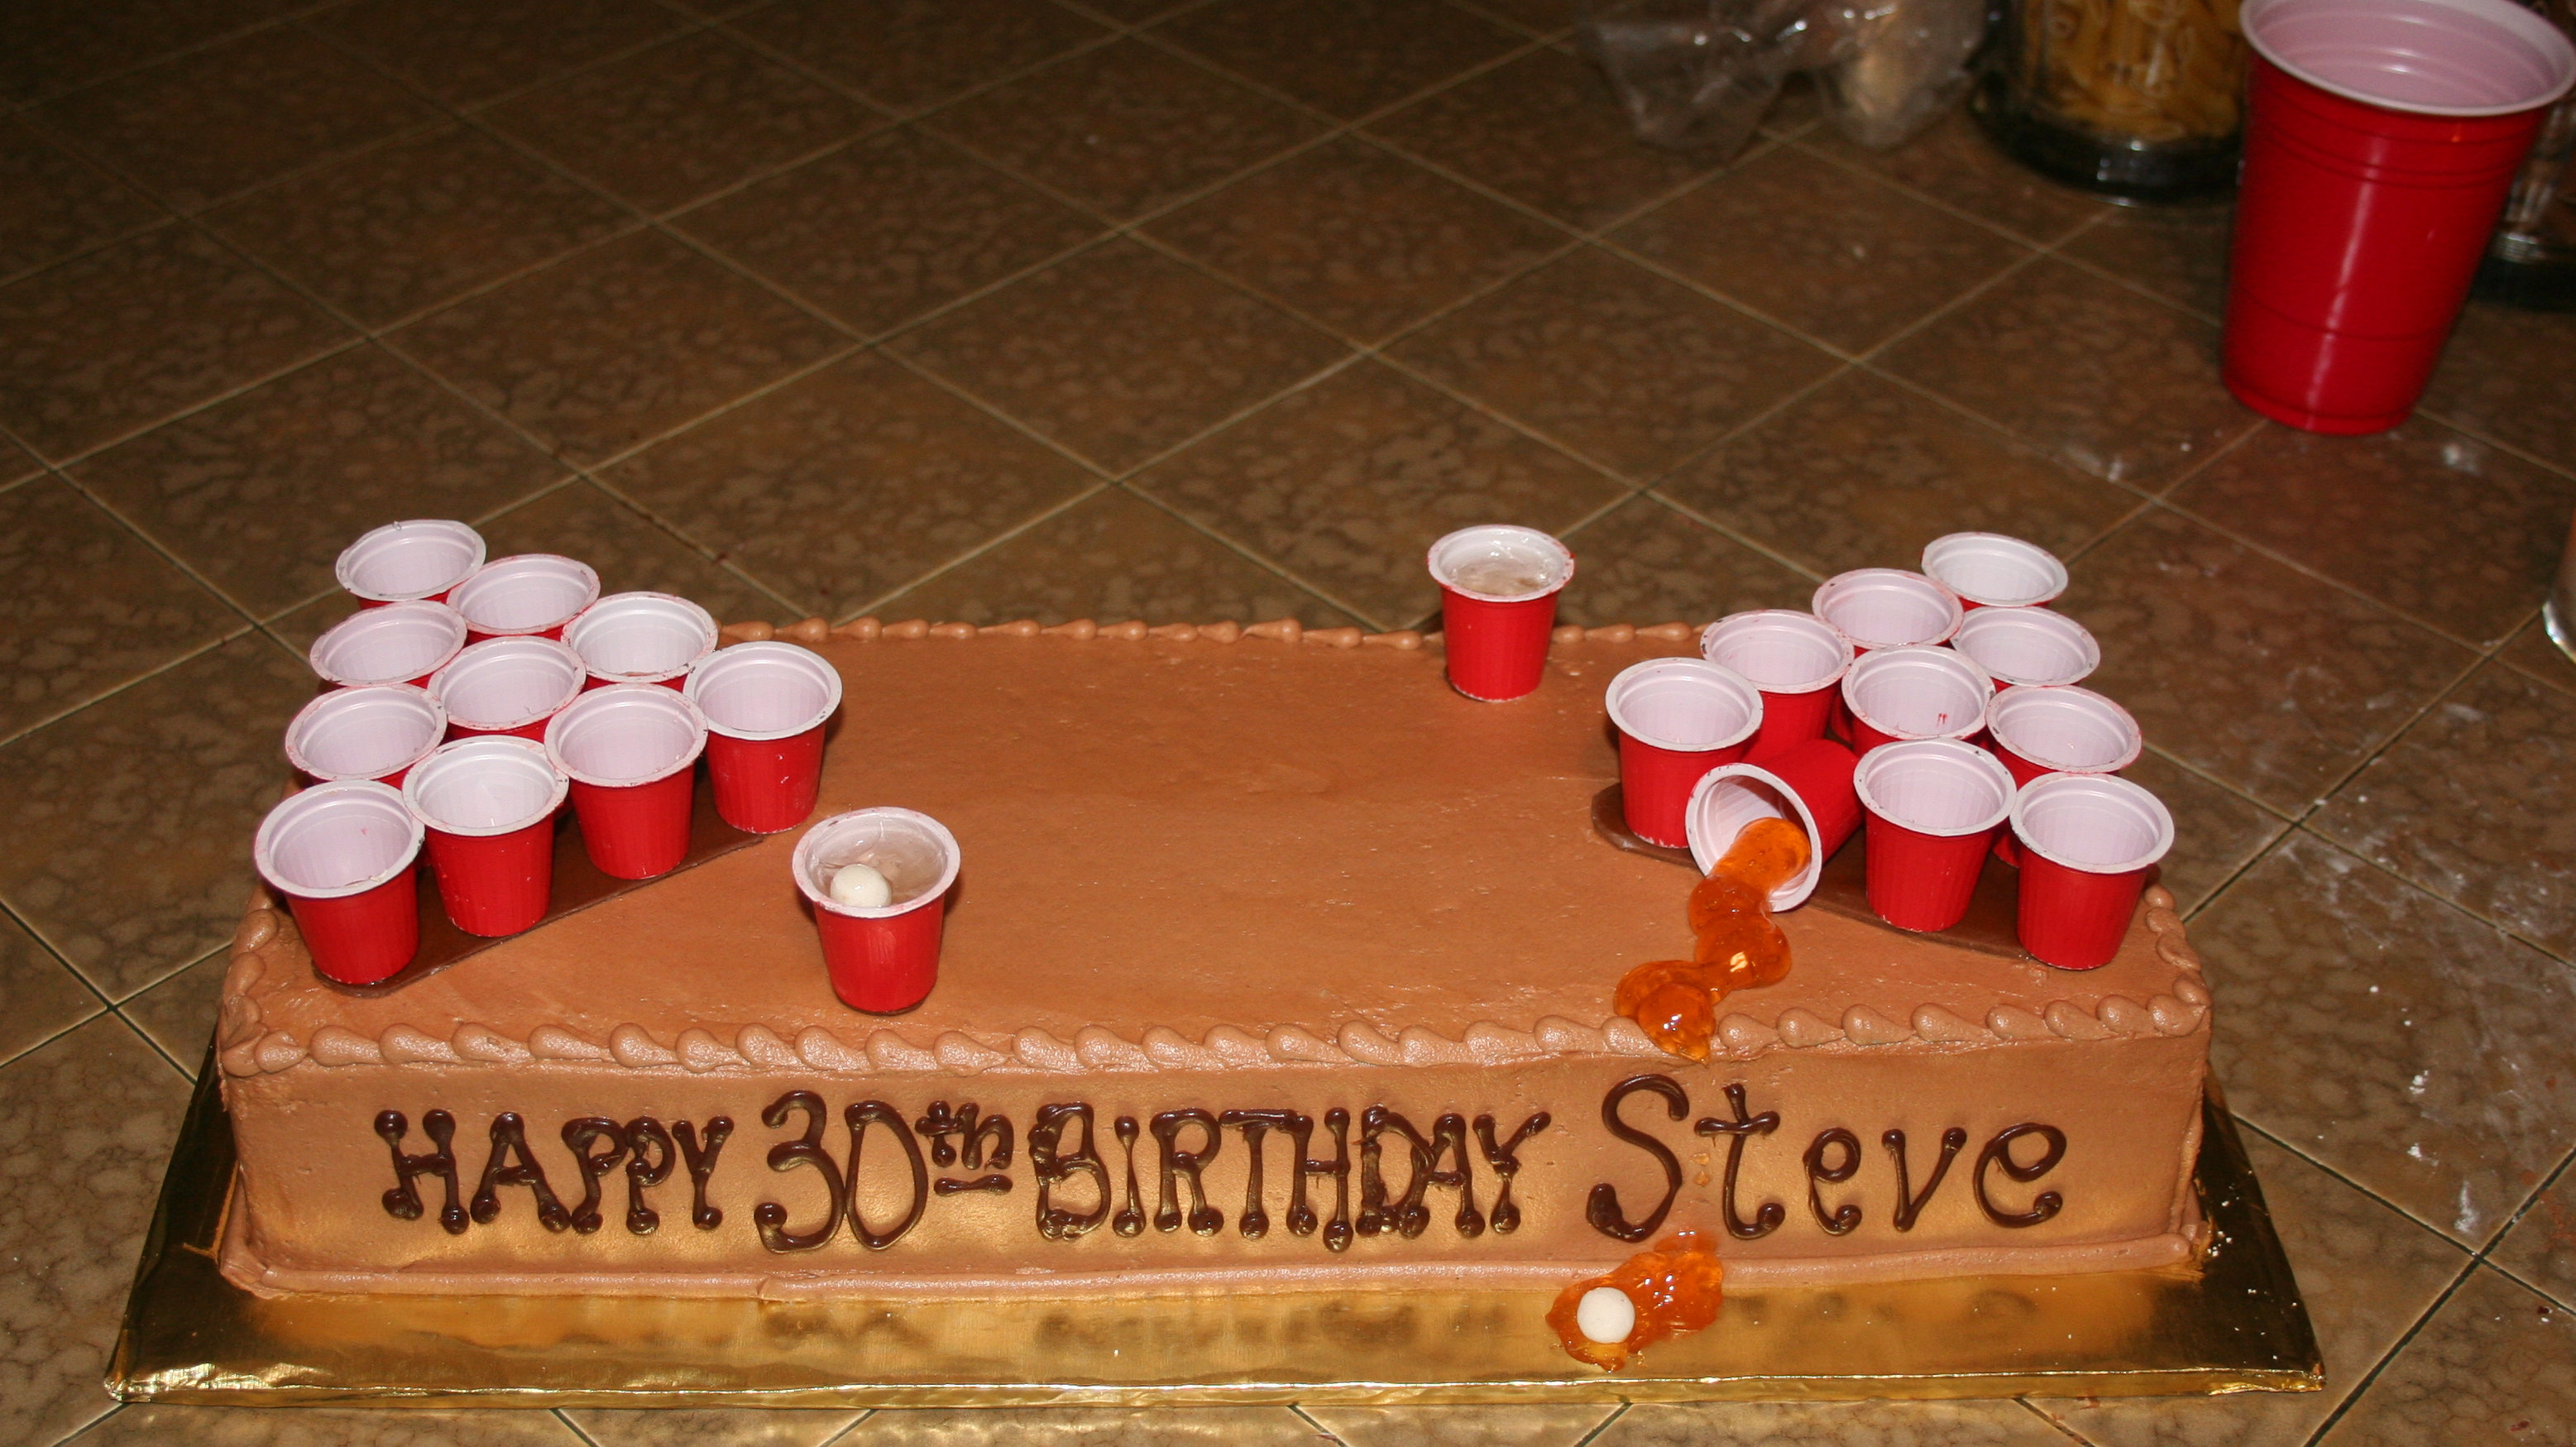 Beer Pong 30th Birthday Cake